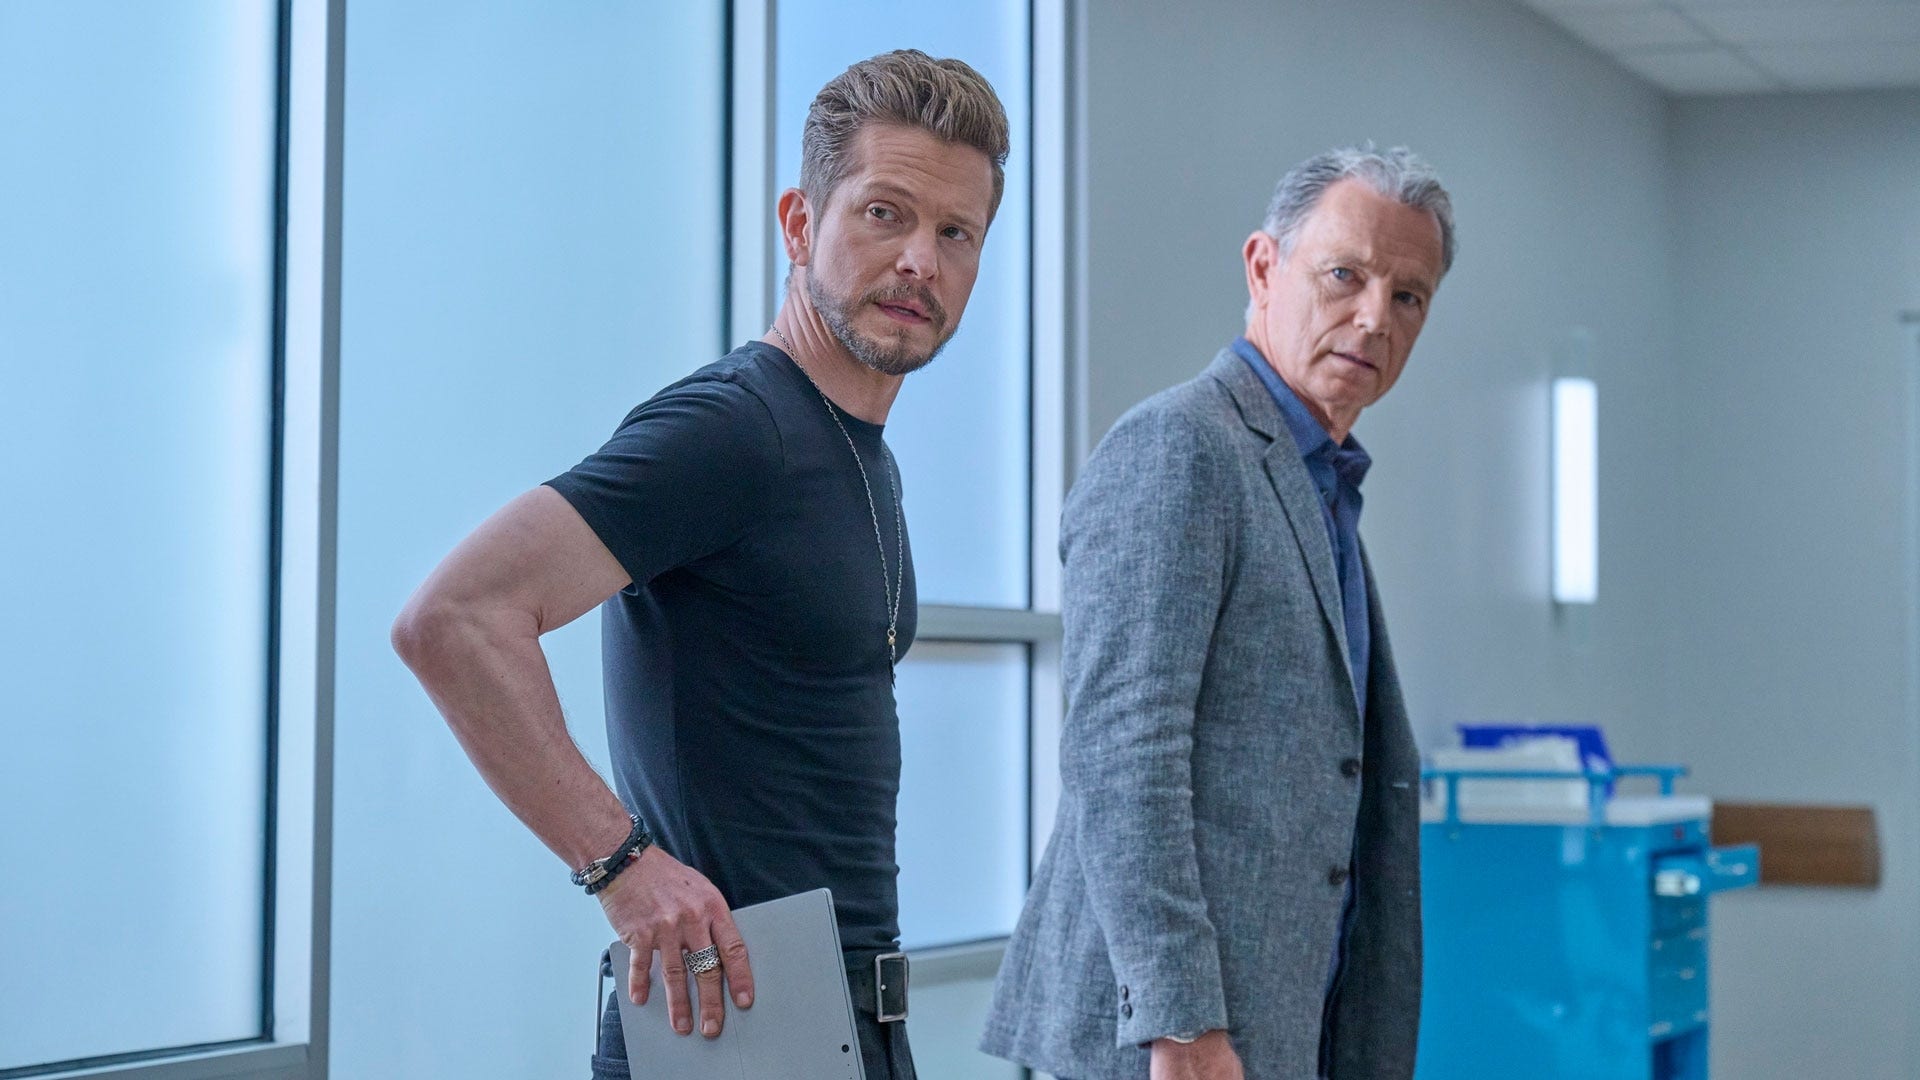 The Resident S6 E6 For Better or Worse 2022-10-26